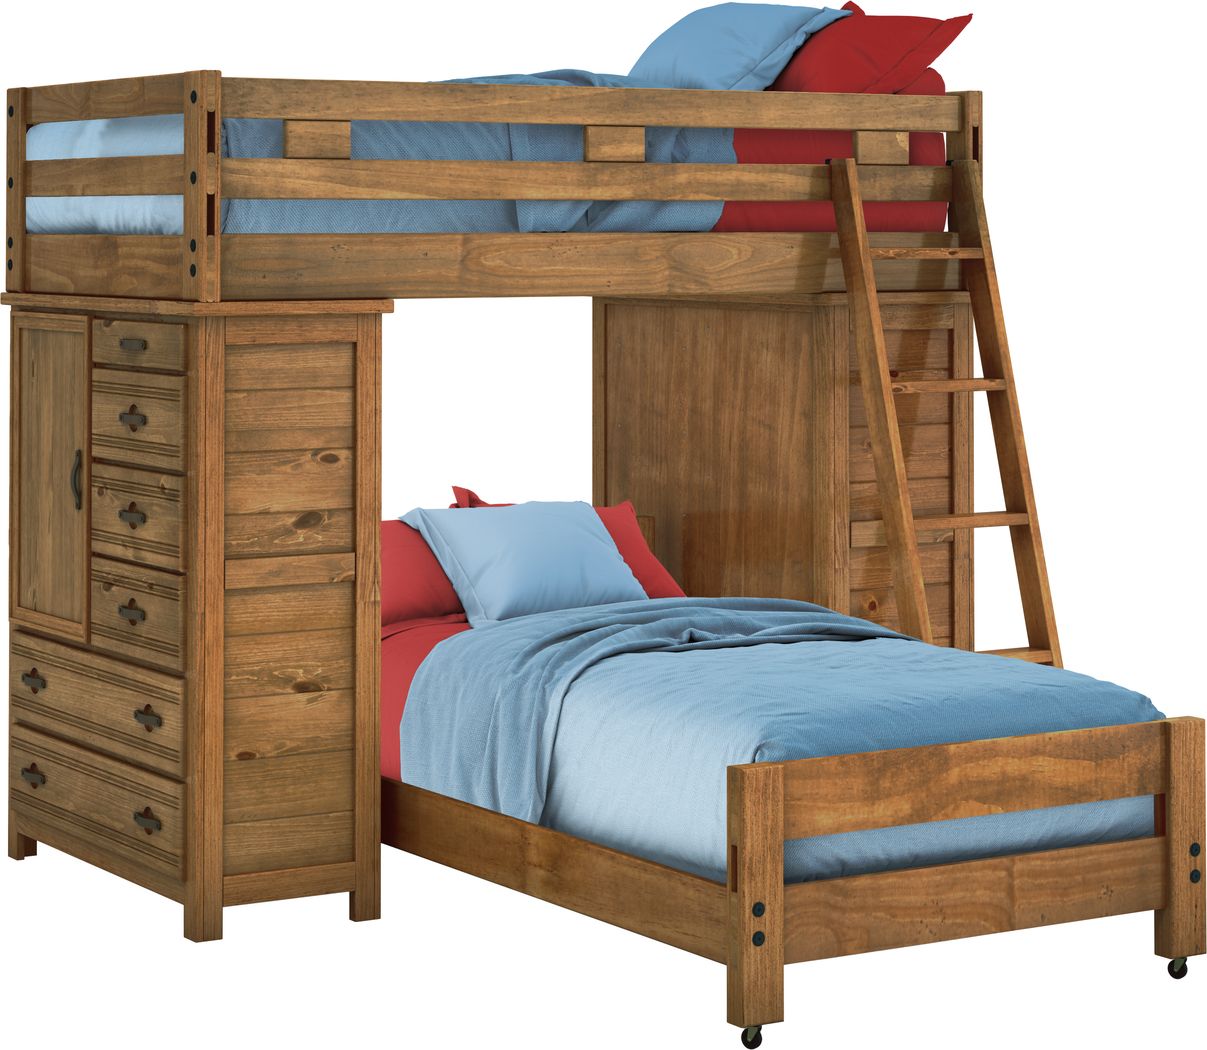 L Shaped Bunk Beds Corner, Woodcrest Heartland L Shaped Twin Loft Bed With Extract